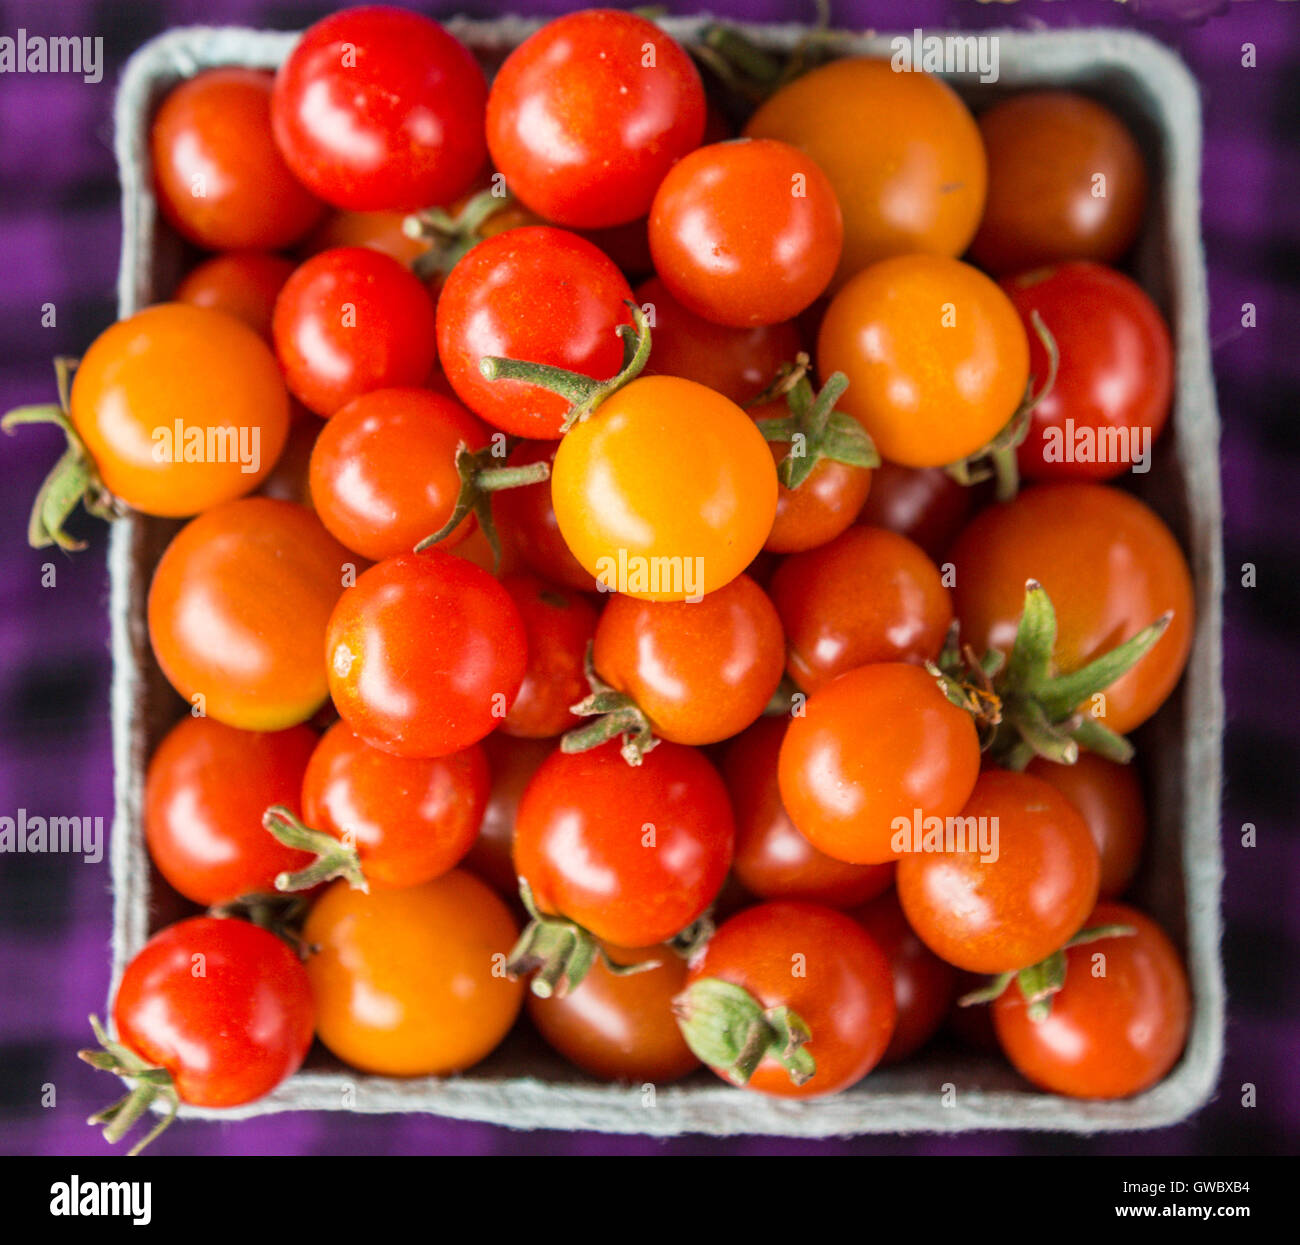 basket of red and yellow tomatoes Stock Photo